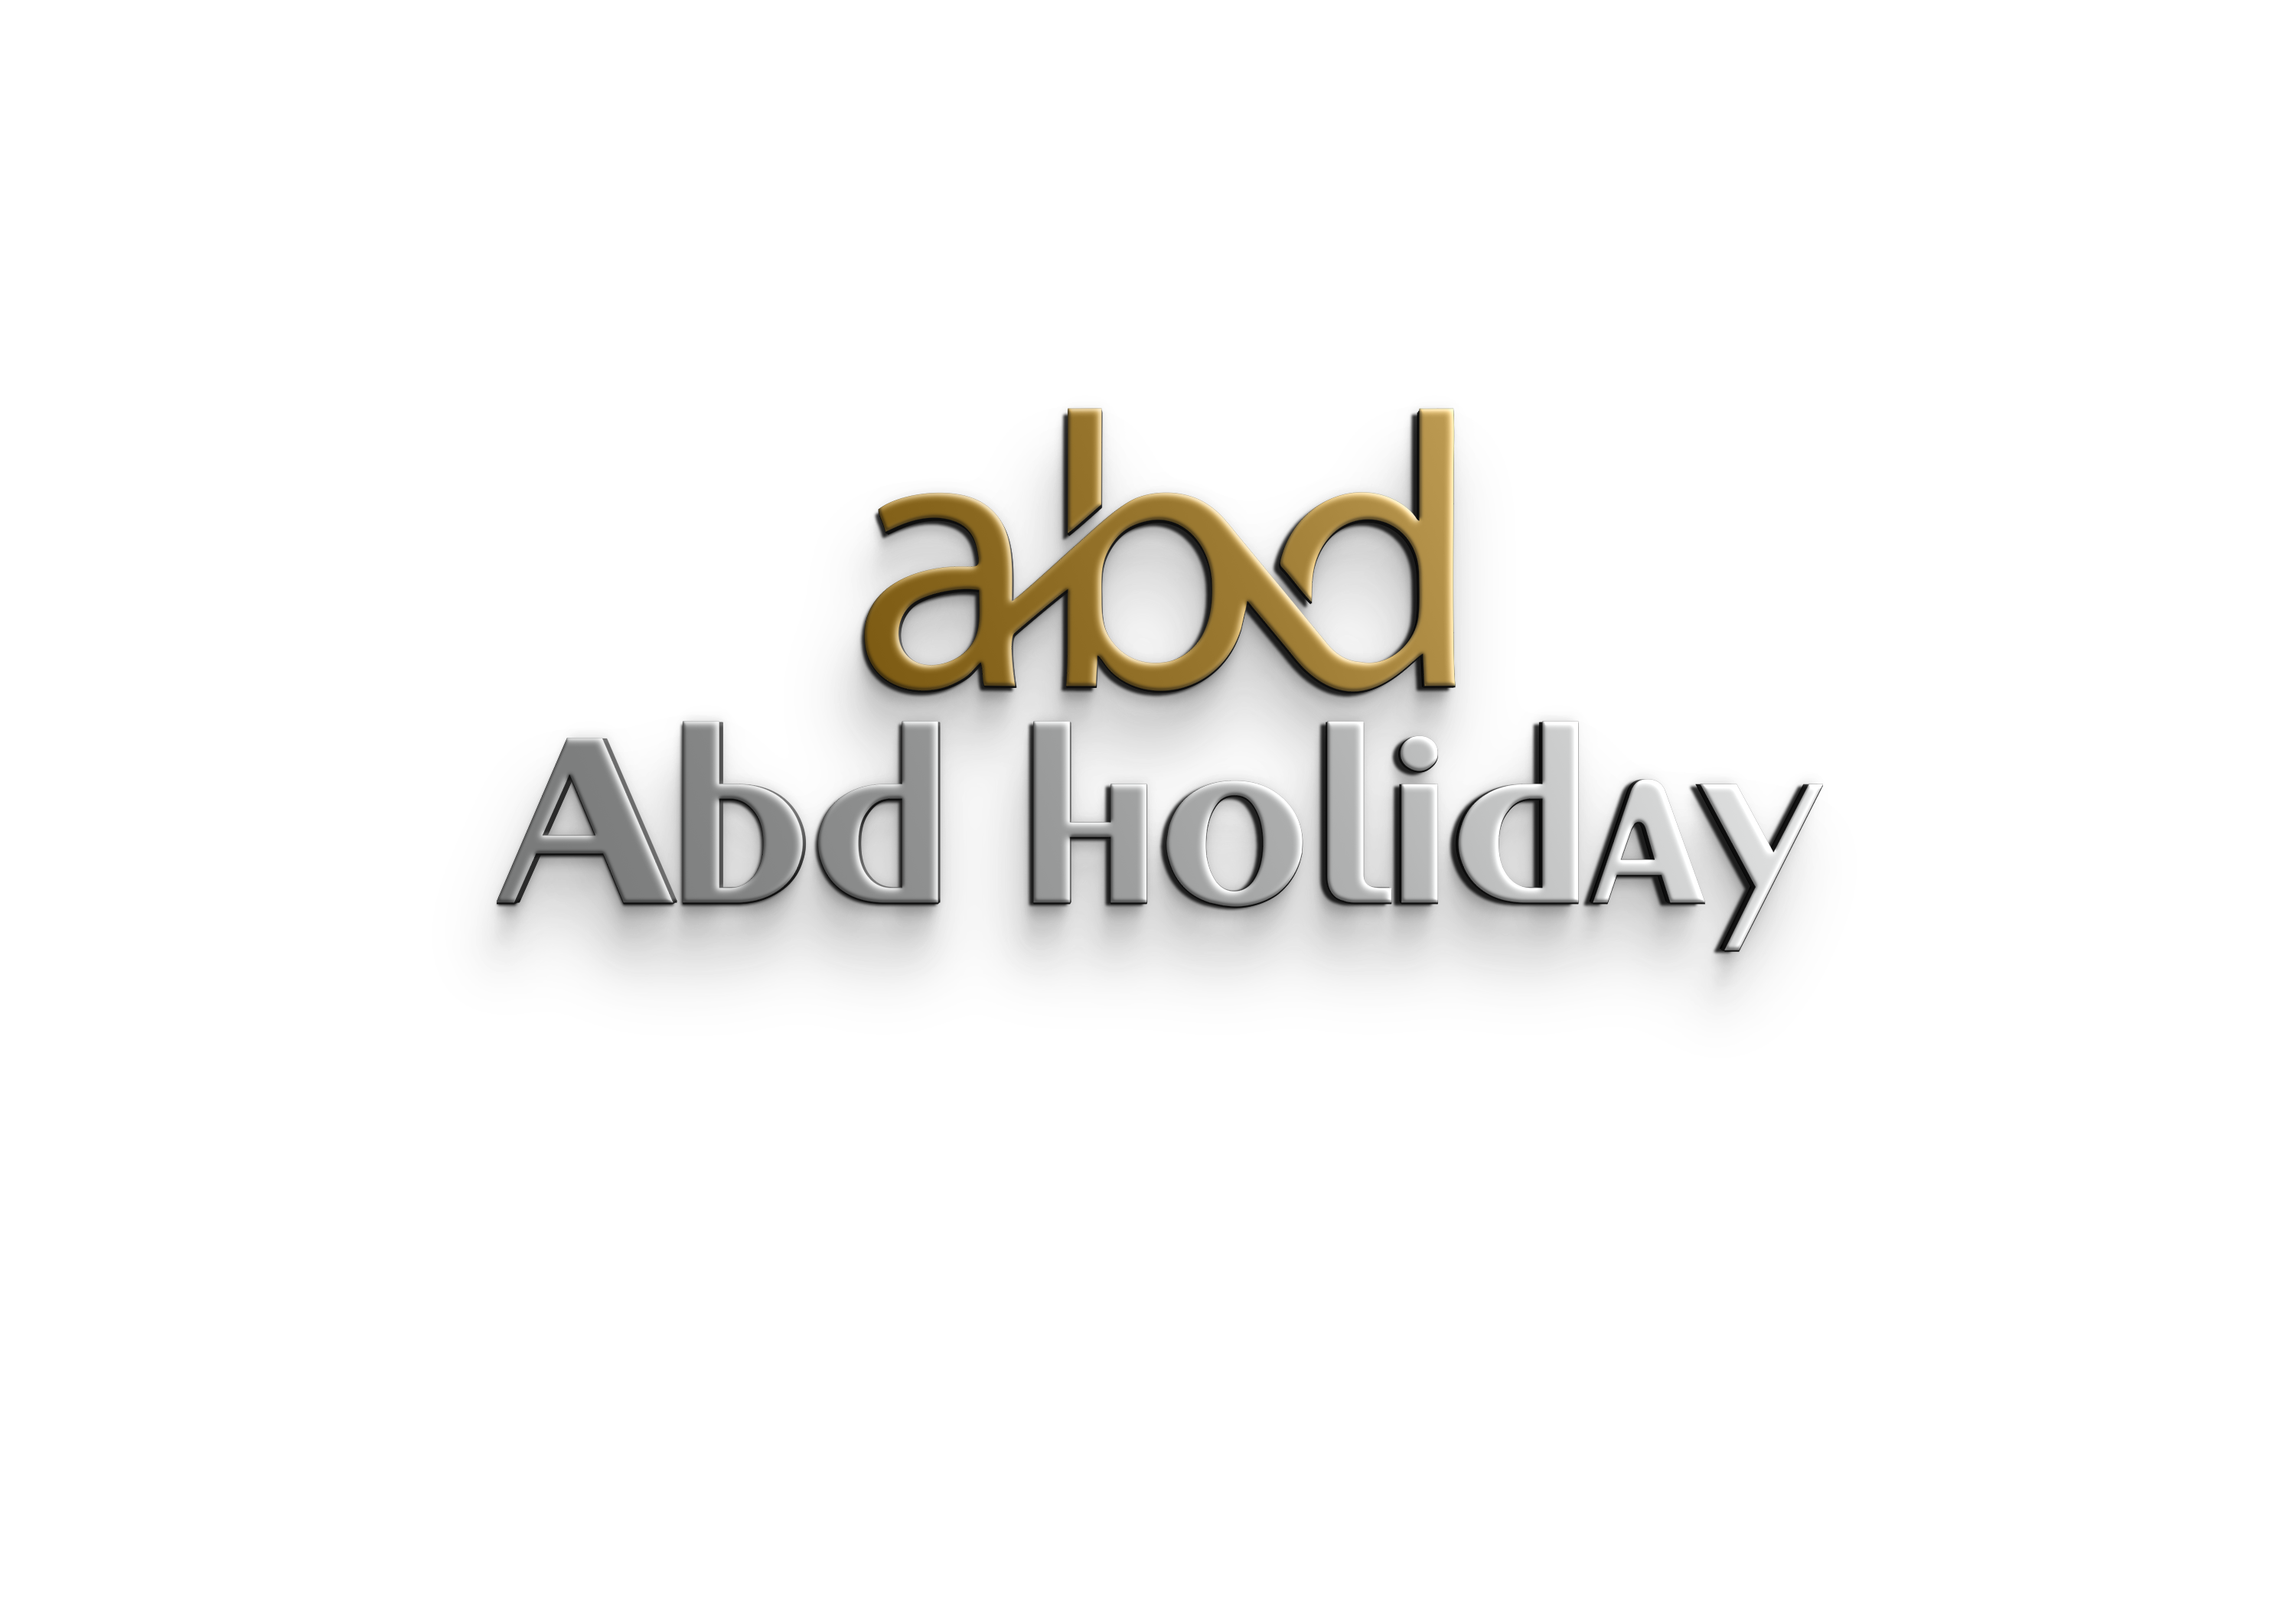 ABD HOLIDAY PRIVATE LIMITED